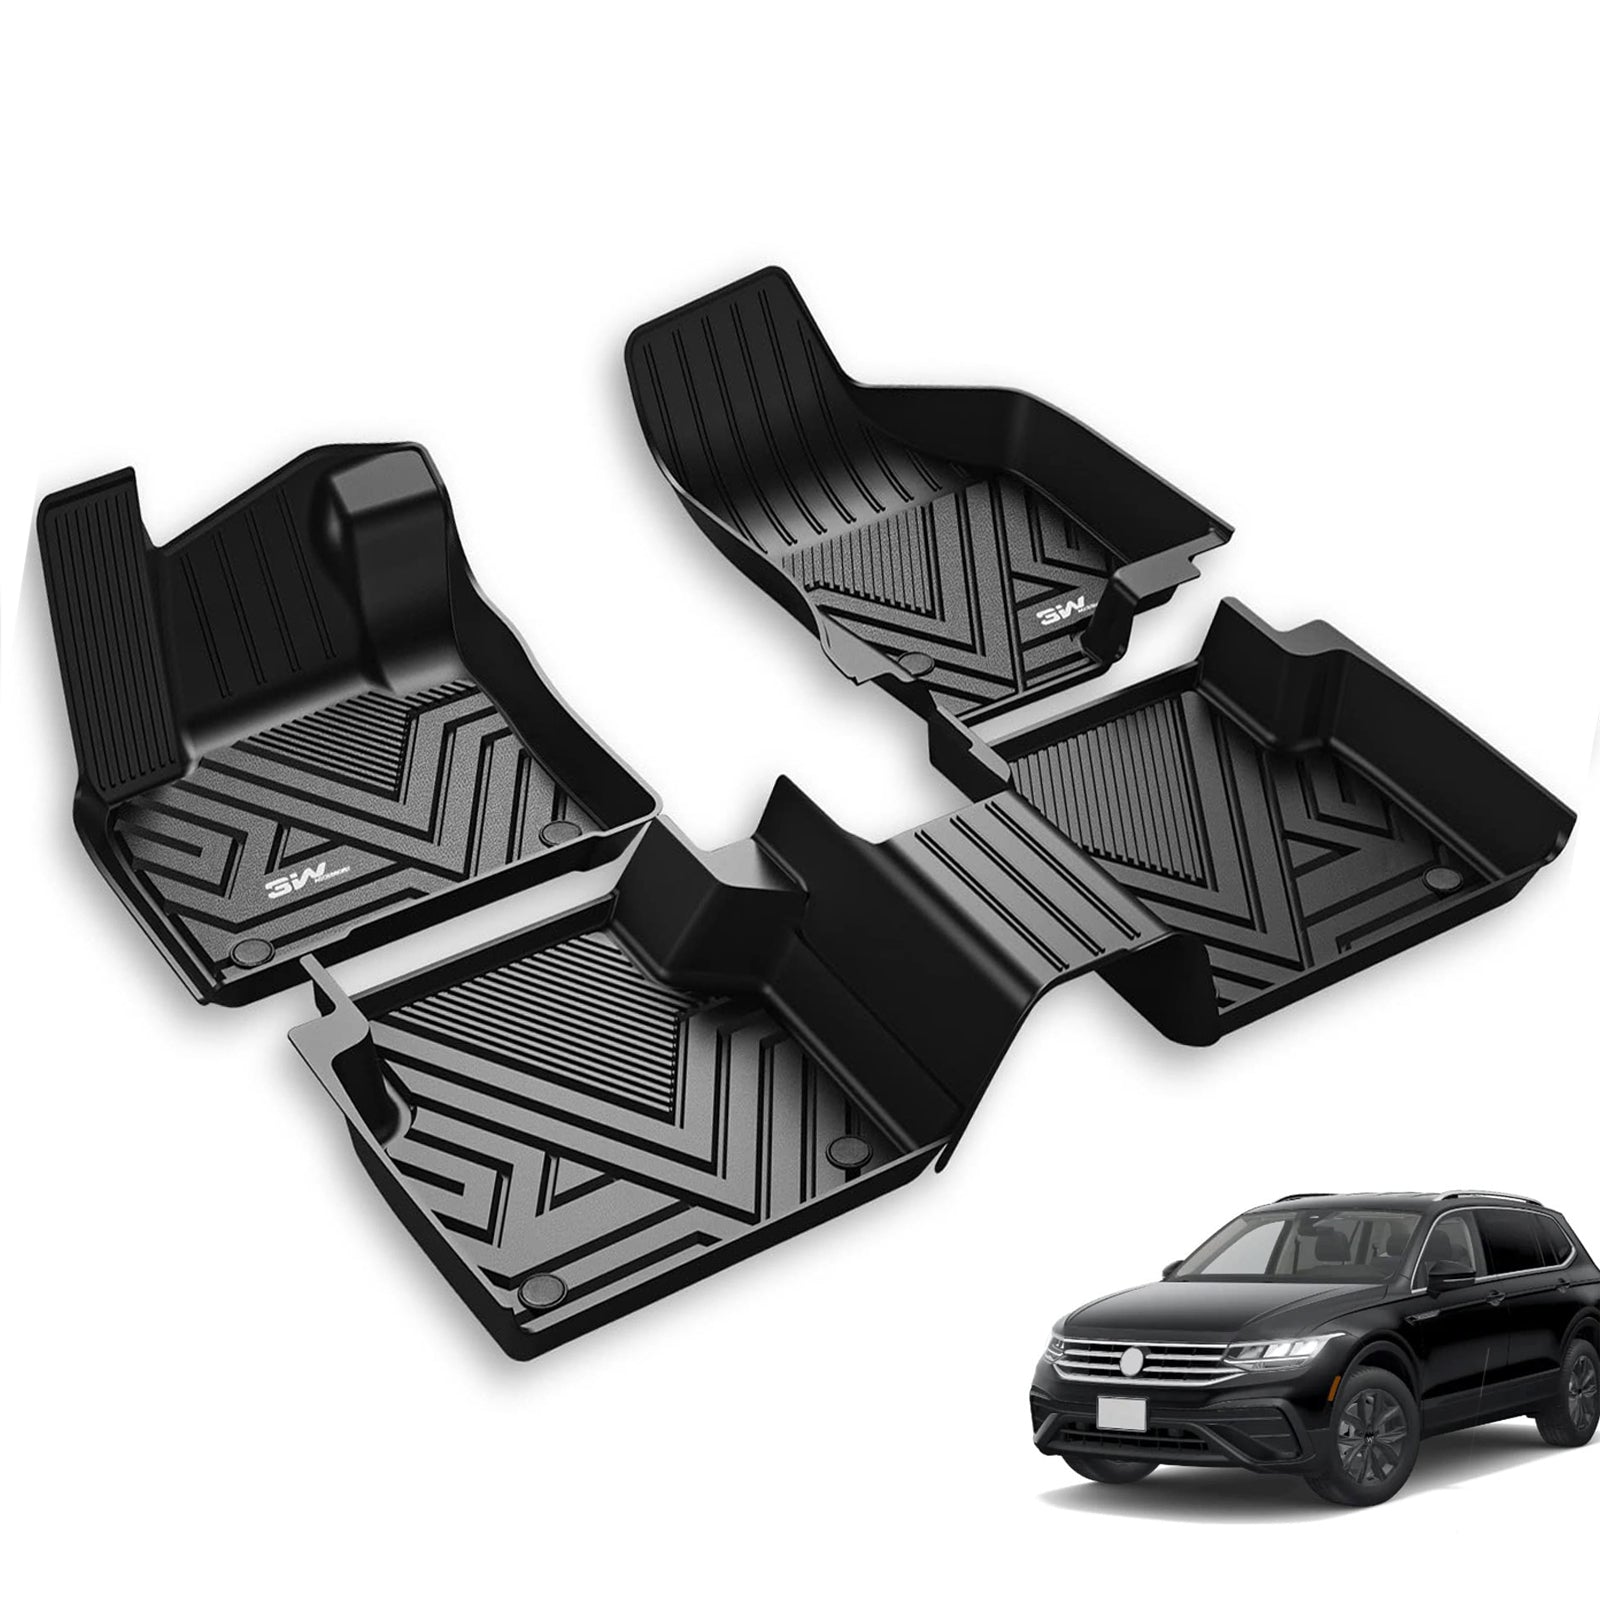 3W Volkswagen Tiguan 5 Seat Only 2018-2024 Custom Floor Mats TPE Material & All-Weather Protection Vehicles & Parts 3Wliners 2018-2024 Tiguan 2018-2024 1st&2nd Row Mats